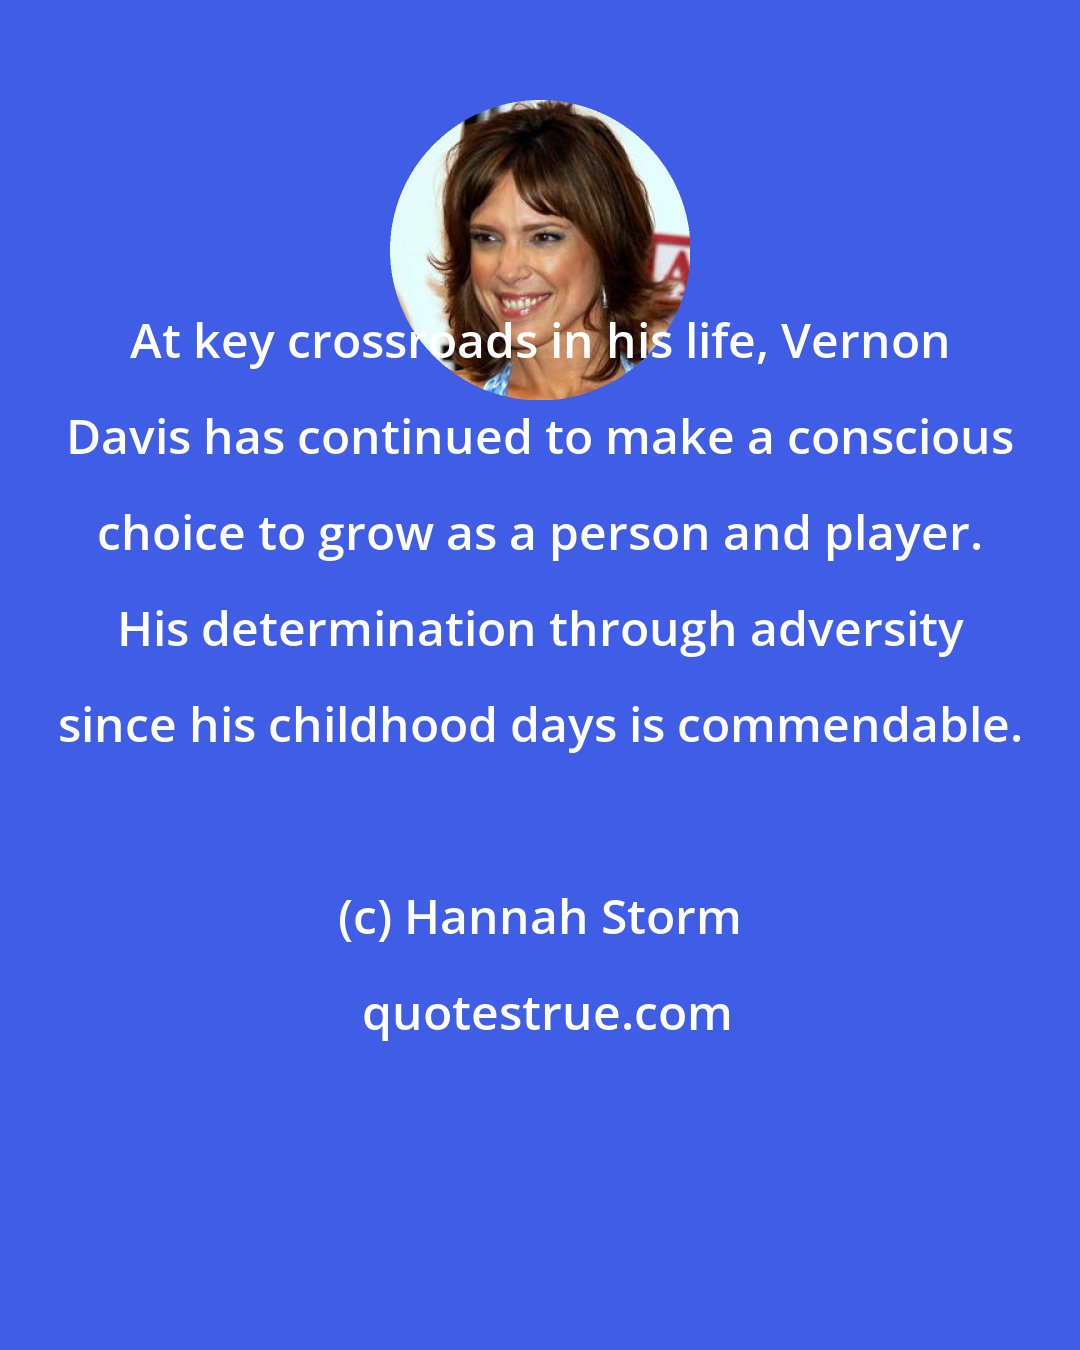 Hannah Storm: At key crossroads in his life, Vernon Davis has continued to make a conscious choice to grow as a person and player. His determination through adversity since his childhood days is commendable.